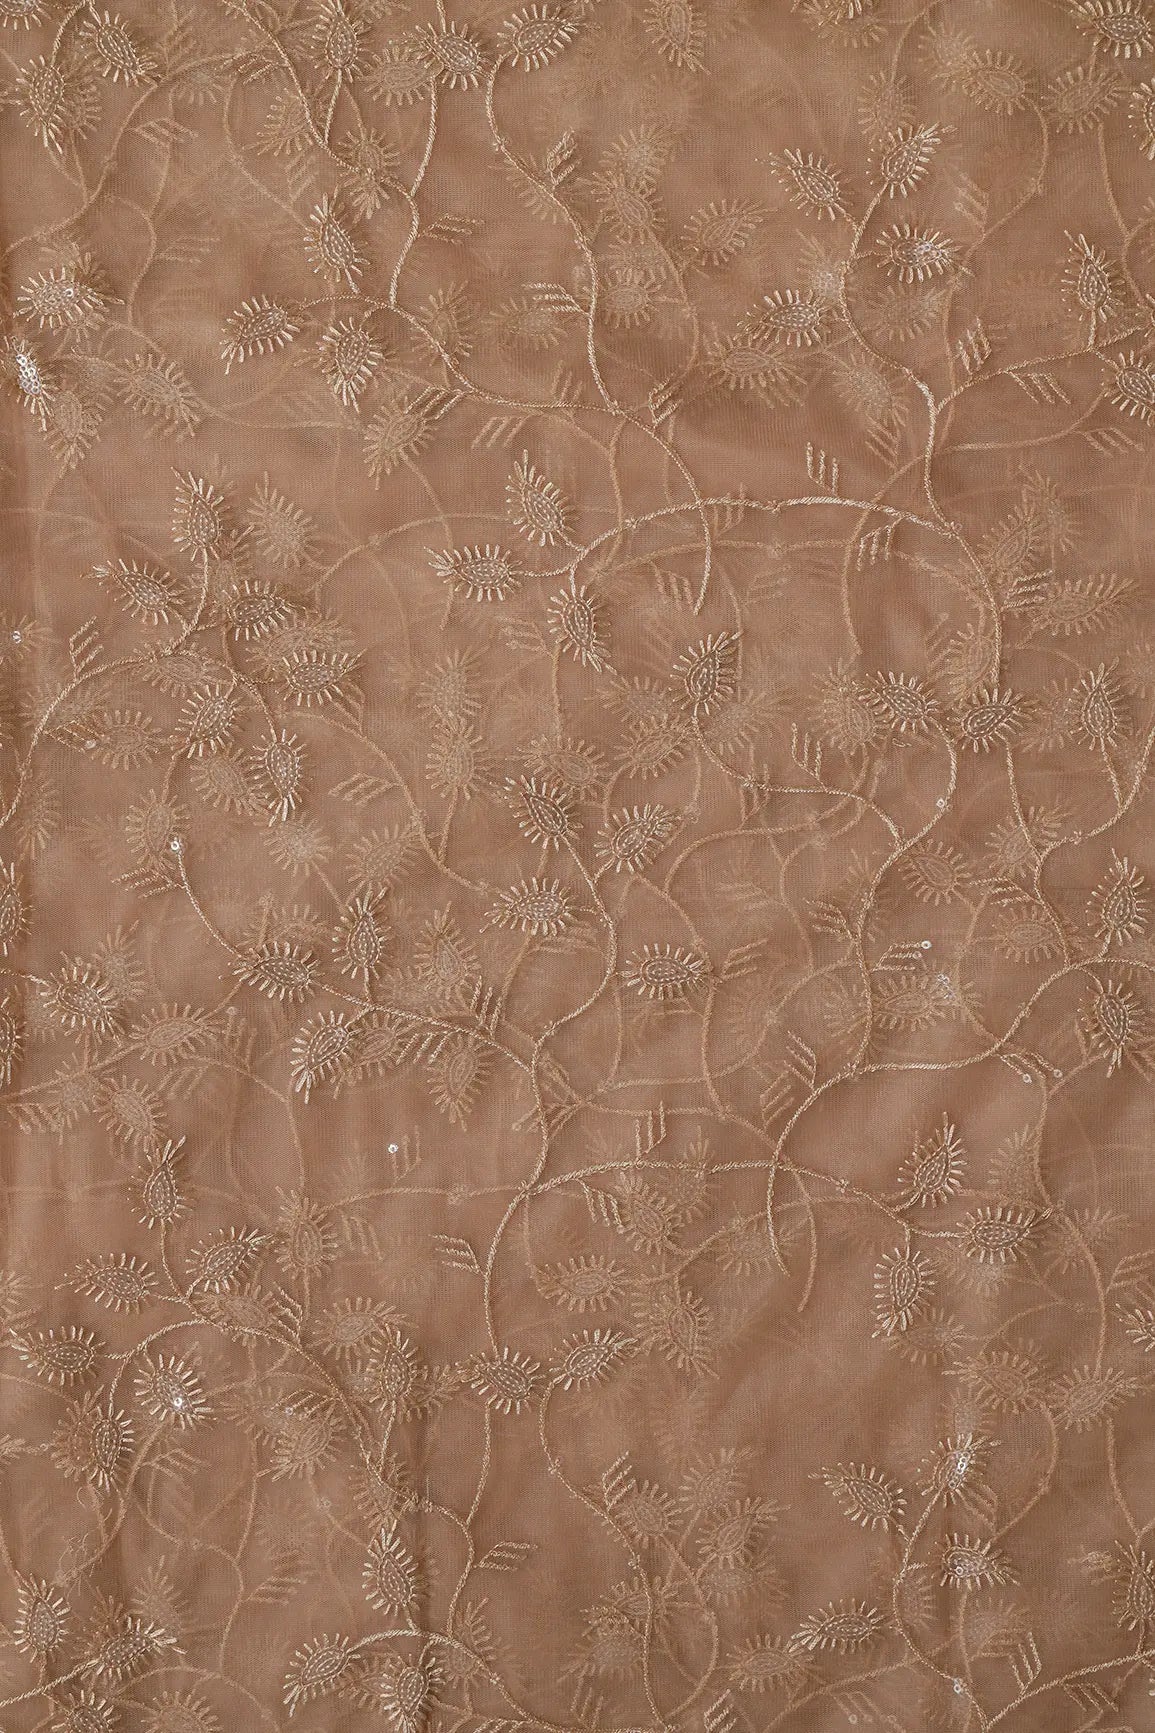 Beige Thread With Water Sequins Leafy Embroidery On Beige Soft Net Fabric - doeraa